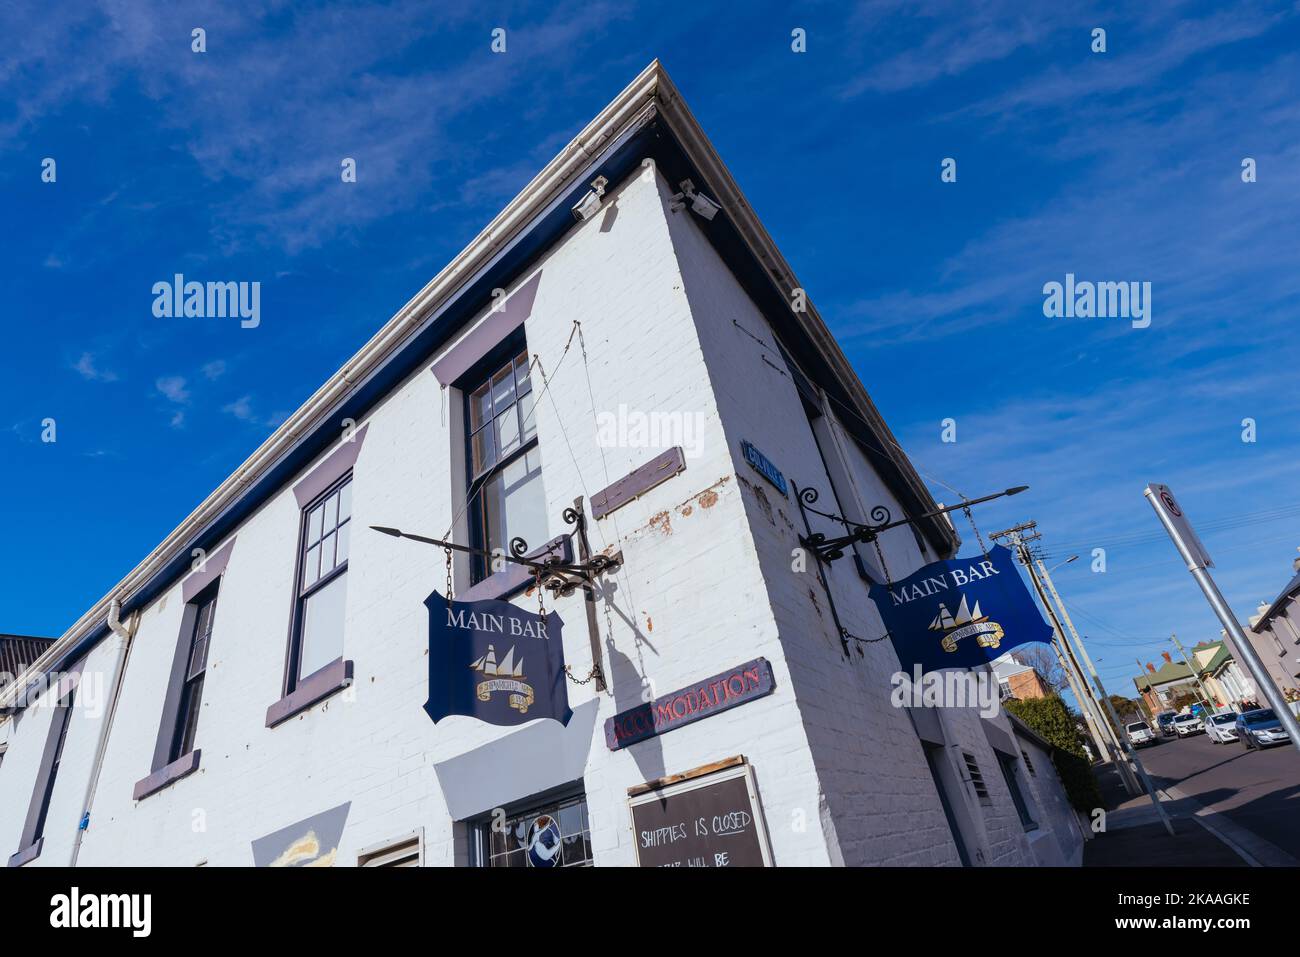 HOBART, AUSTRALIA - SEPTEMBER 15, 2022: Shipwrights Arms Hotel in Battery Point which is a suburb in Hobart, Tasmania, Australia. Famous for its windi Stock Photo